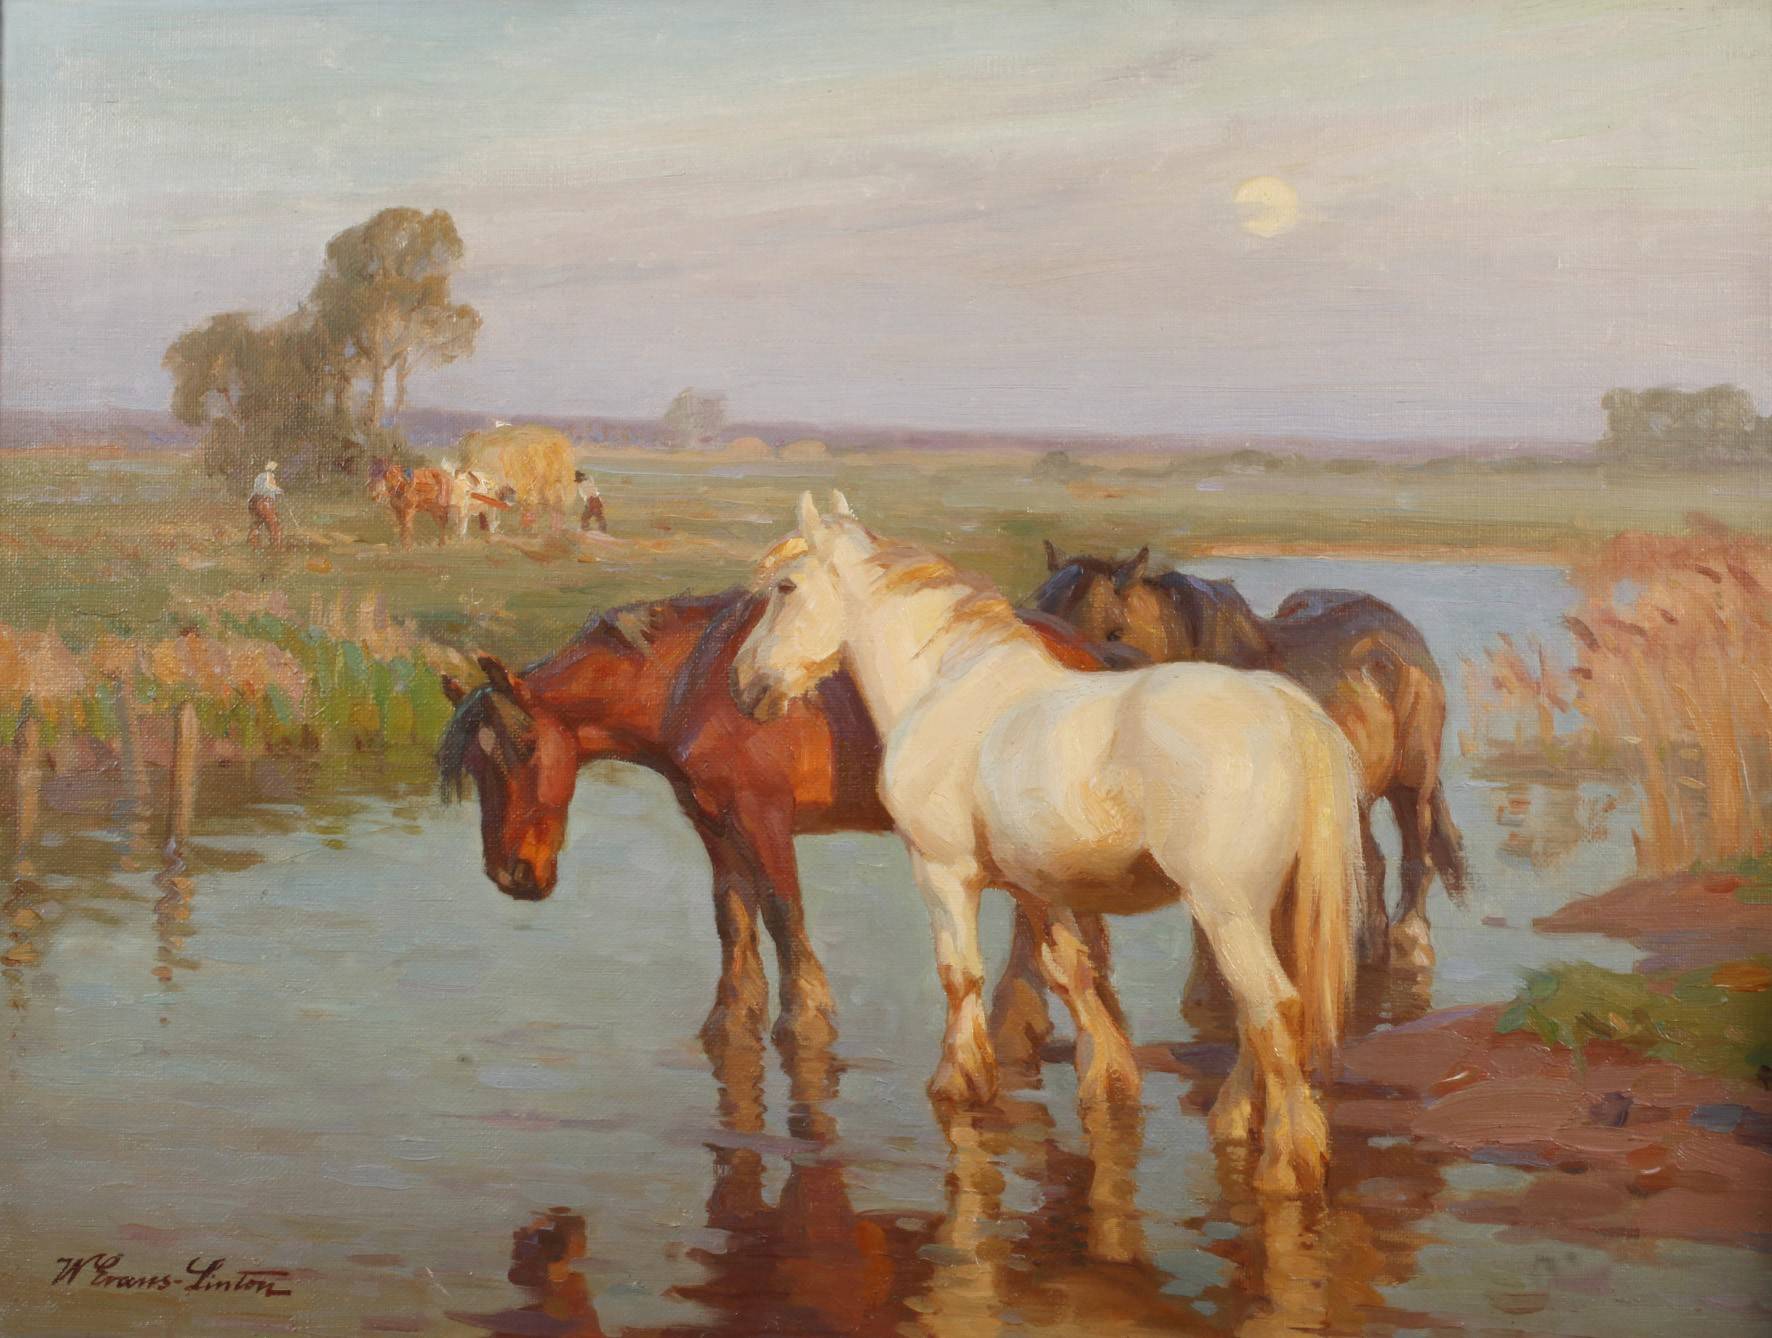 William Evans Linton, The Close of a Hot Day